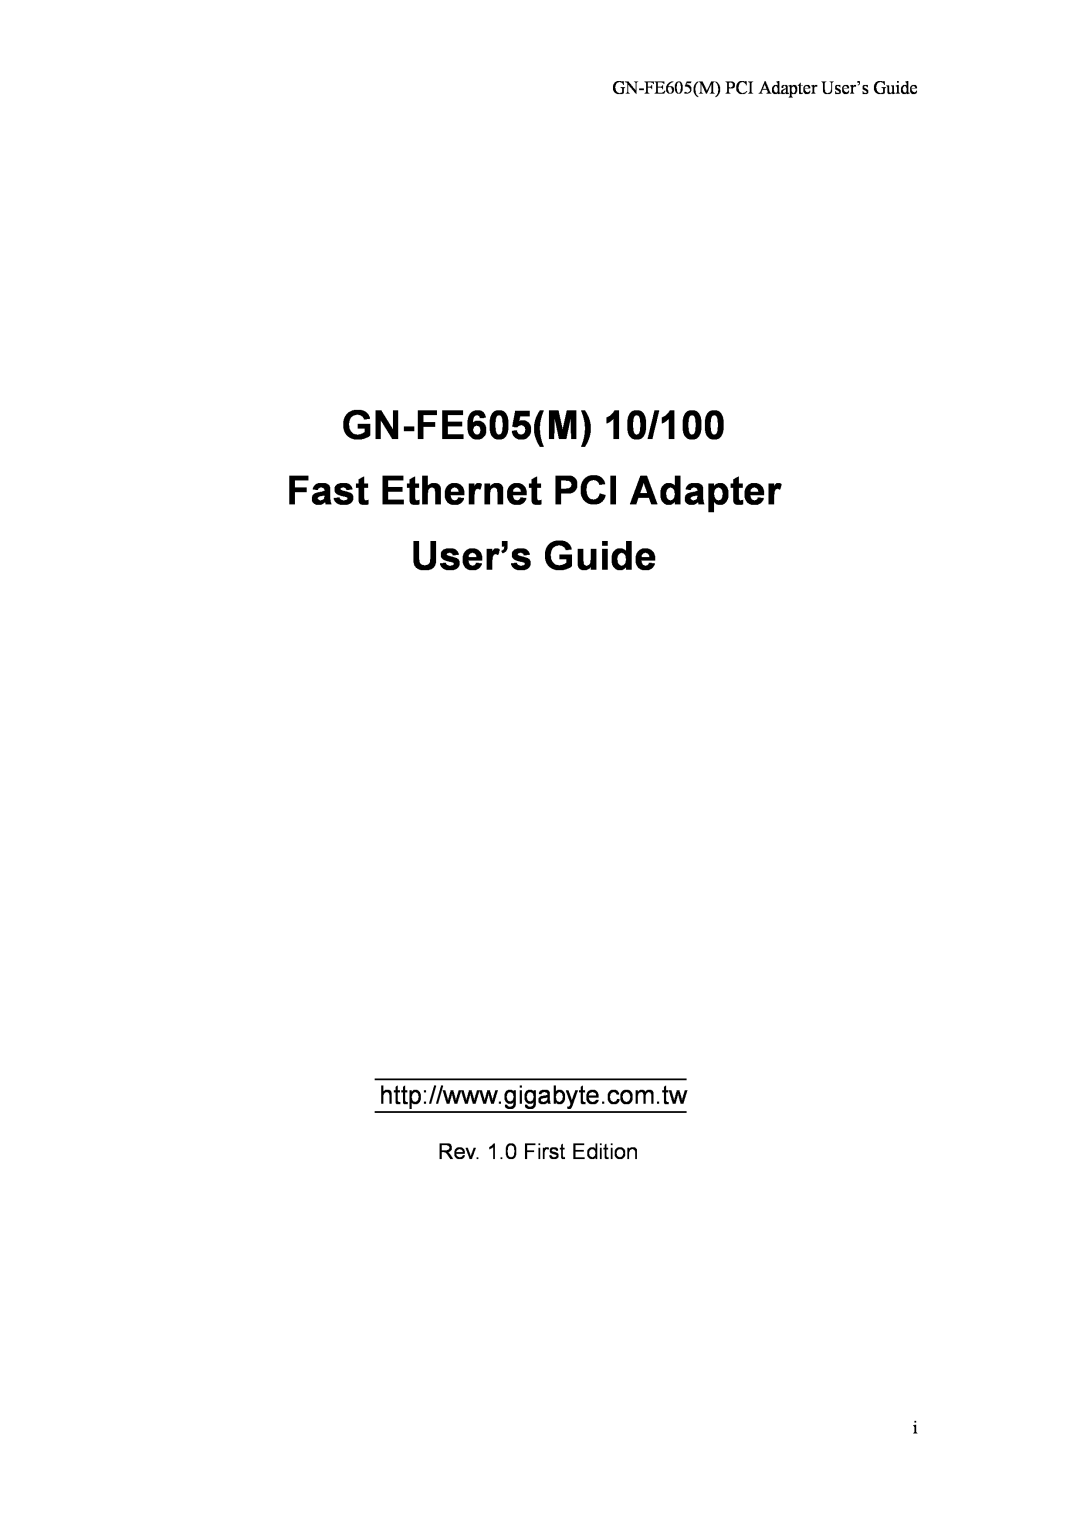 Gigabyte GN-FE605(M) manual GN-FE605M 10/100 Fast Ethernet PCI Adapter User’s Guide, Rev. 1.0 First Edition 